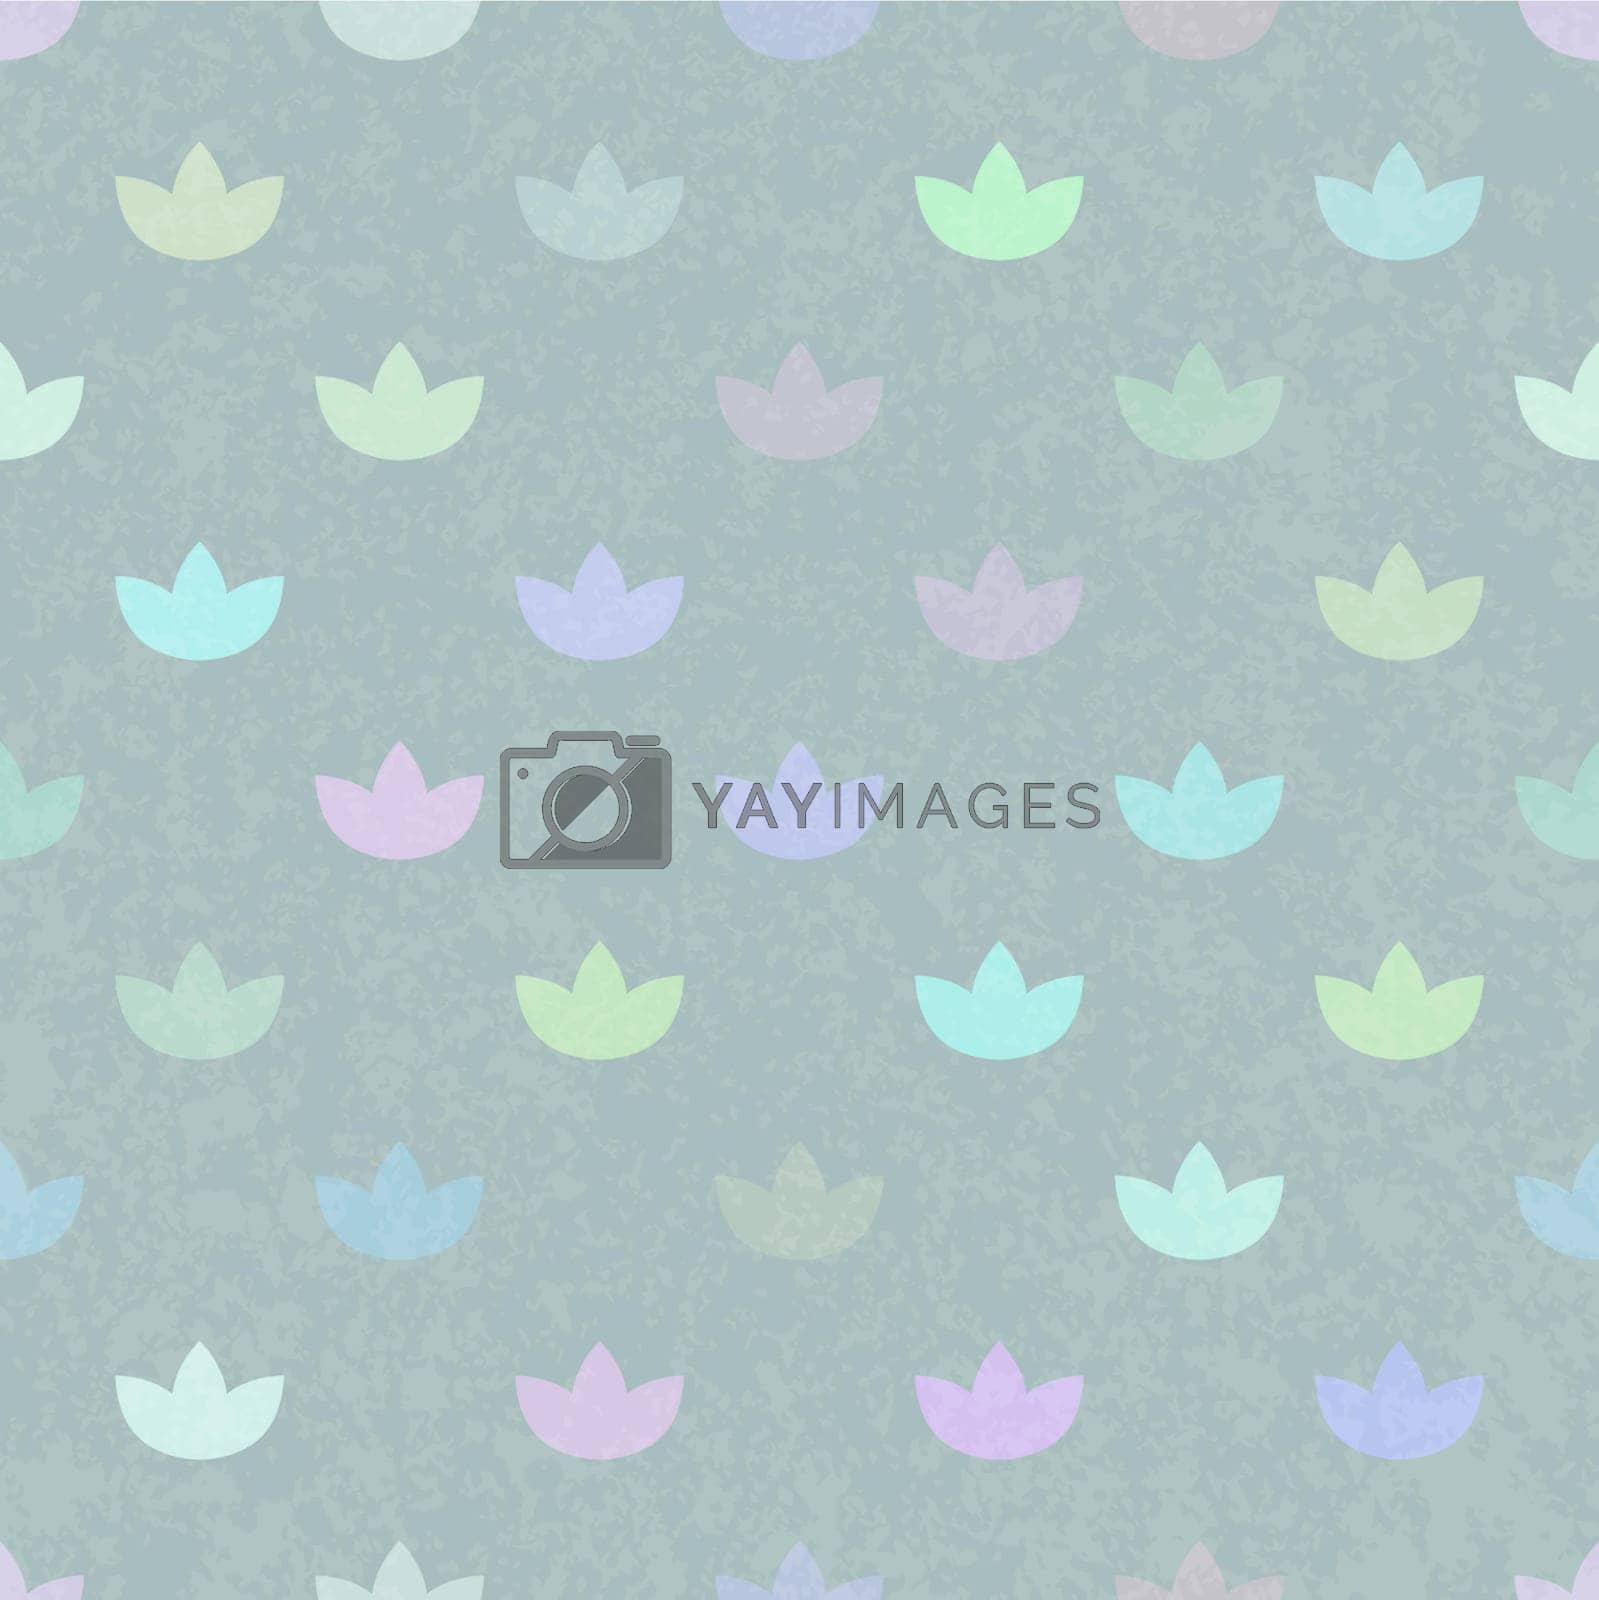 Royalty free image of Seamless vector pattern of flower silhouettes in pastel colors by Pakaliuyeva